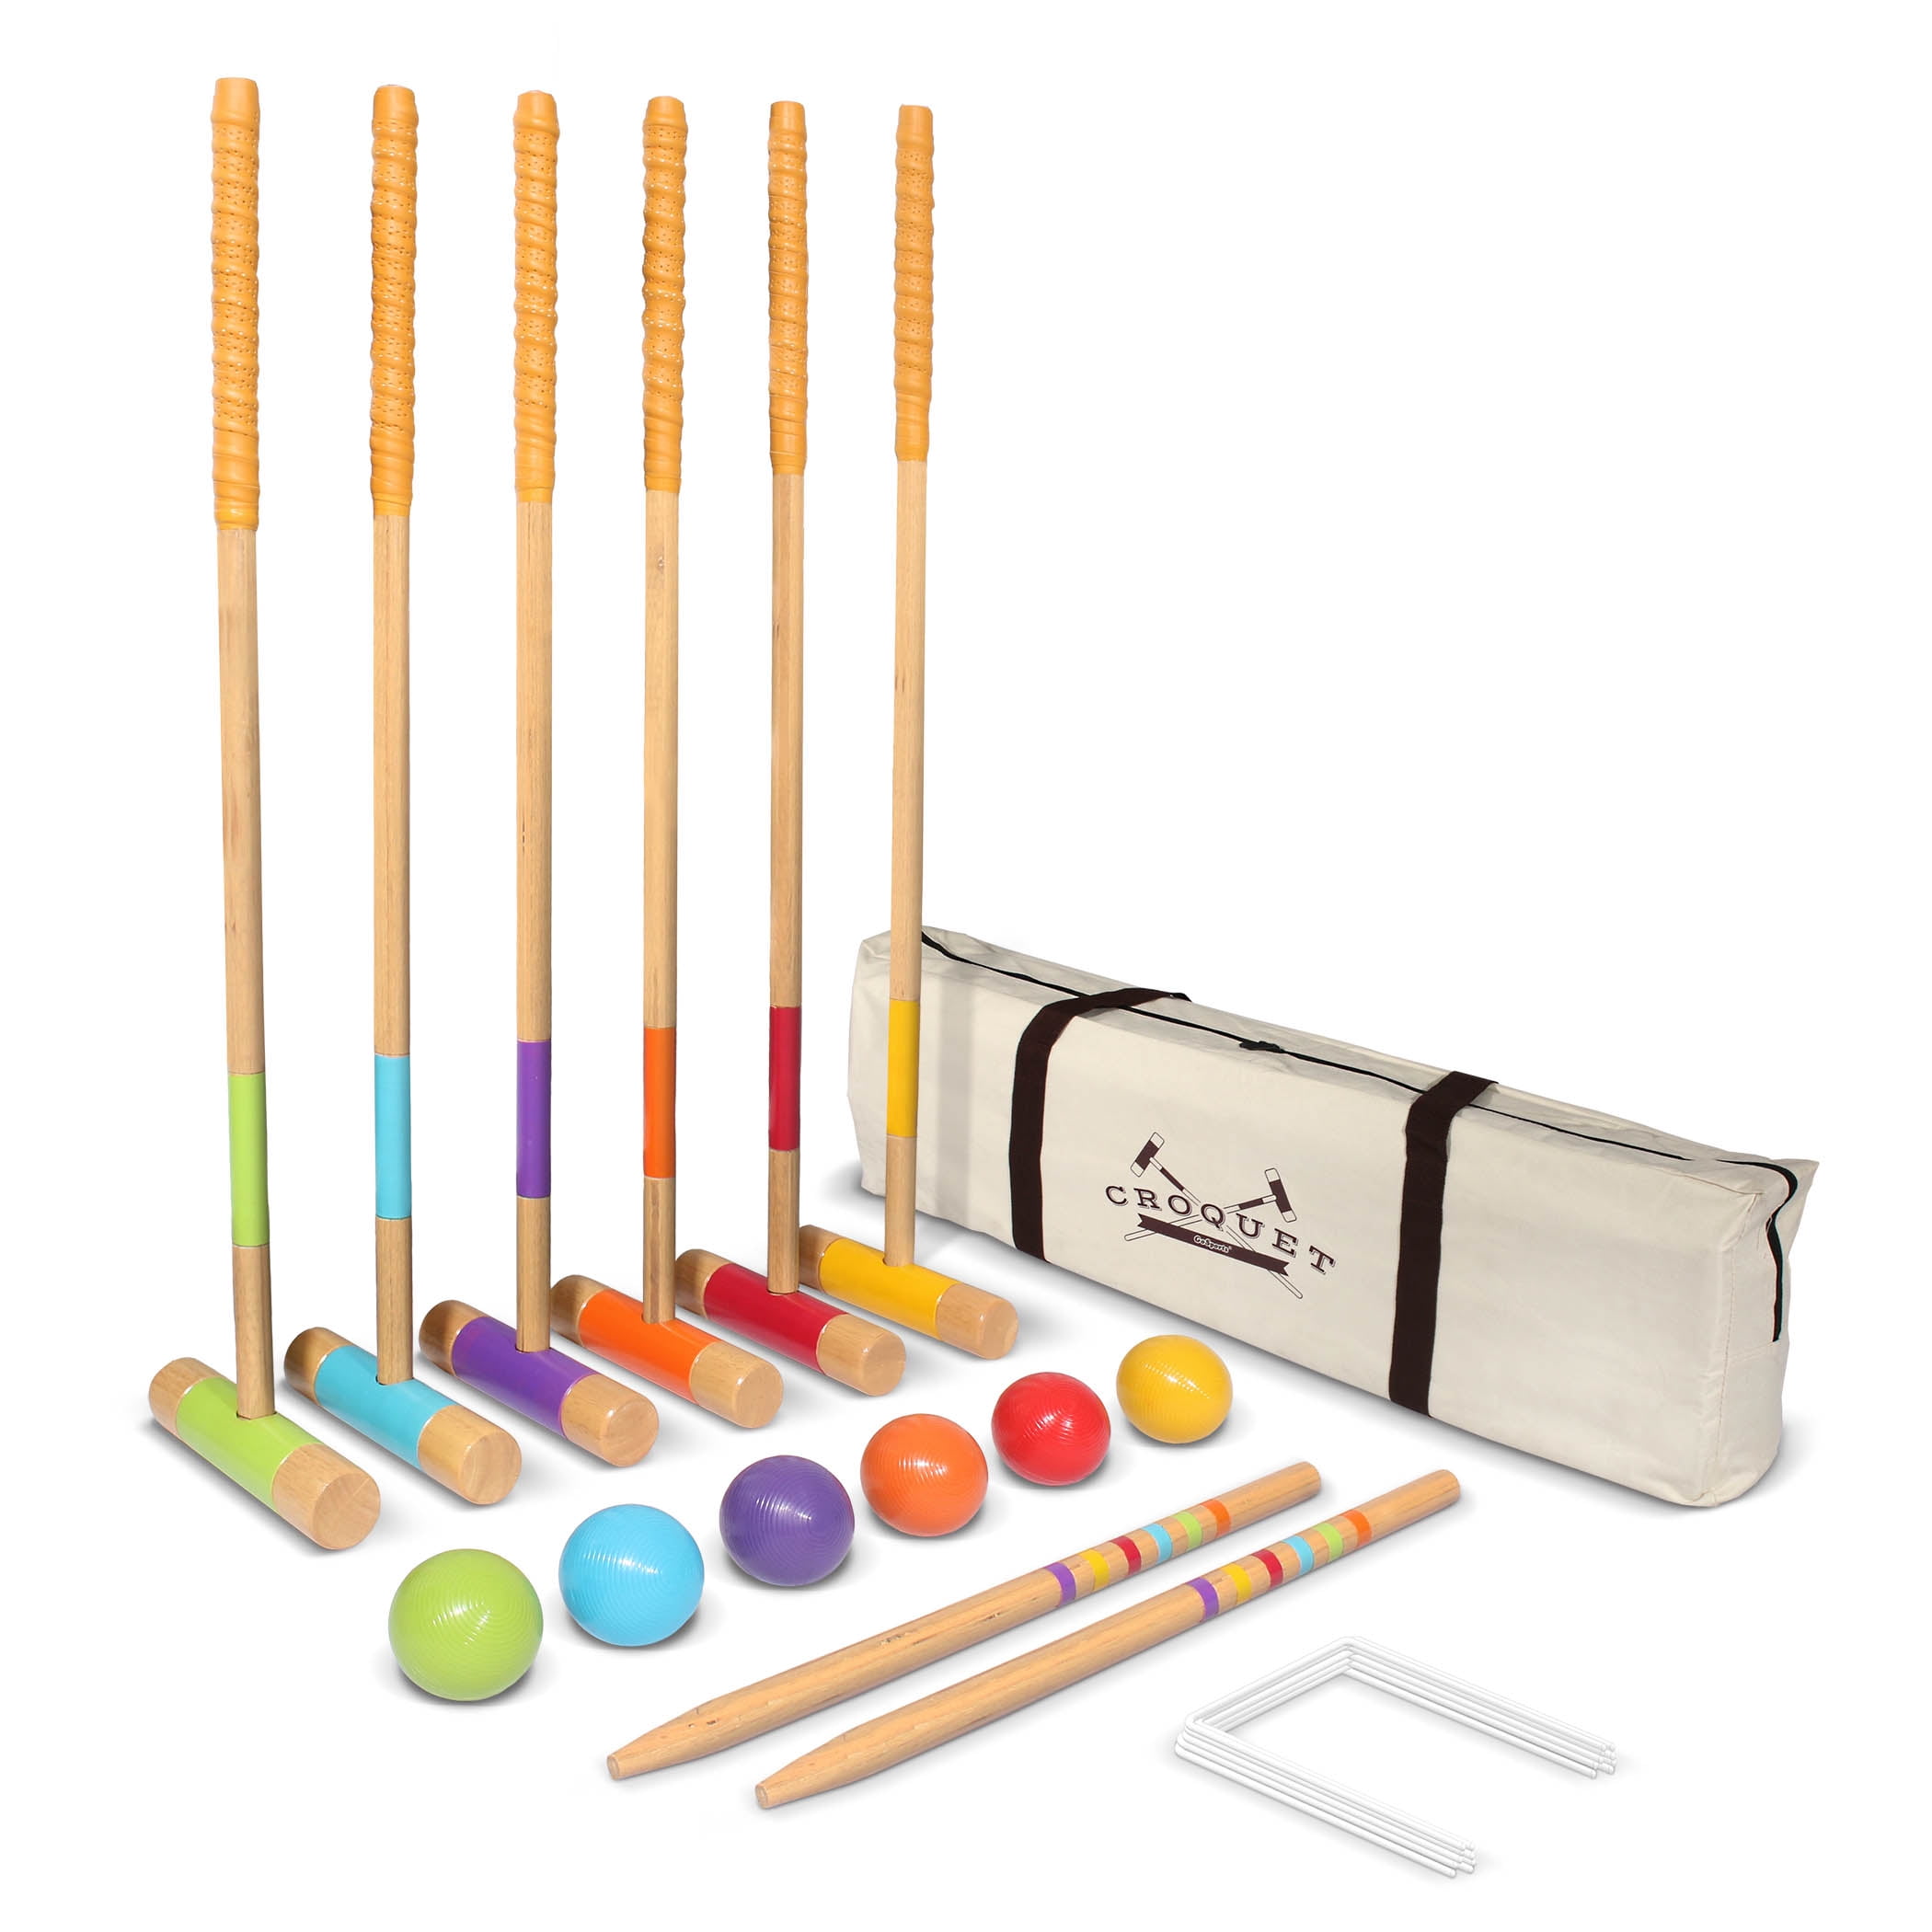 Juegoal Six Player Croquet Set With Drawstring Bag for sale online 